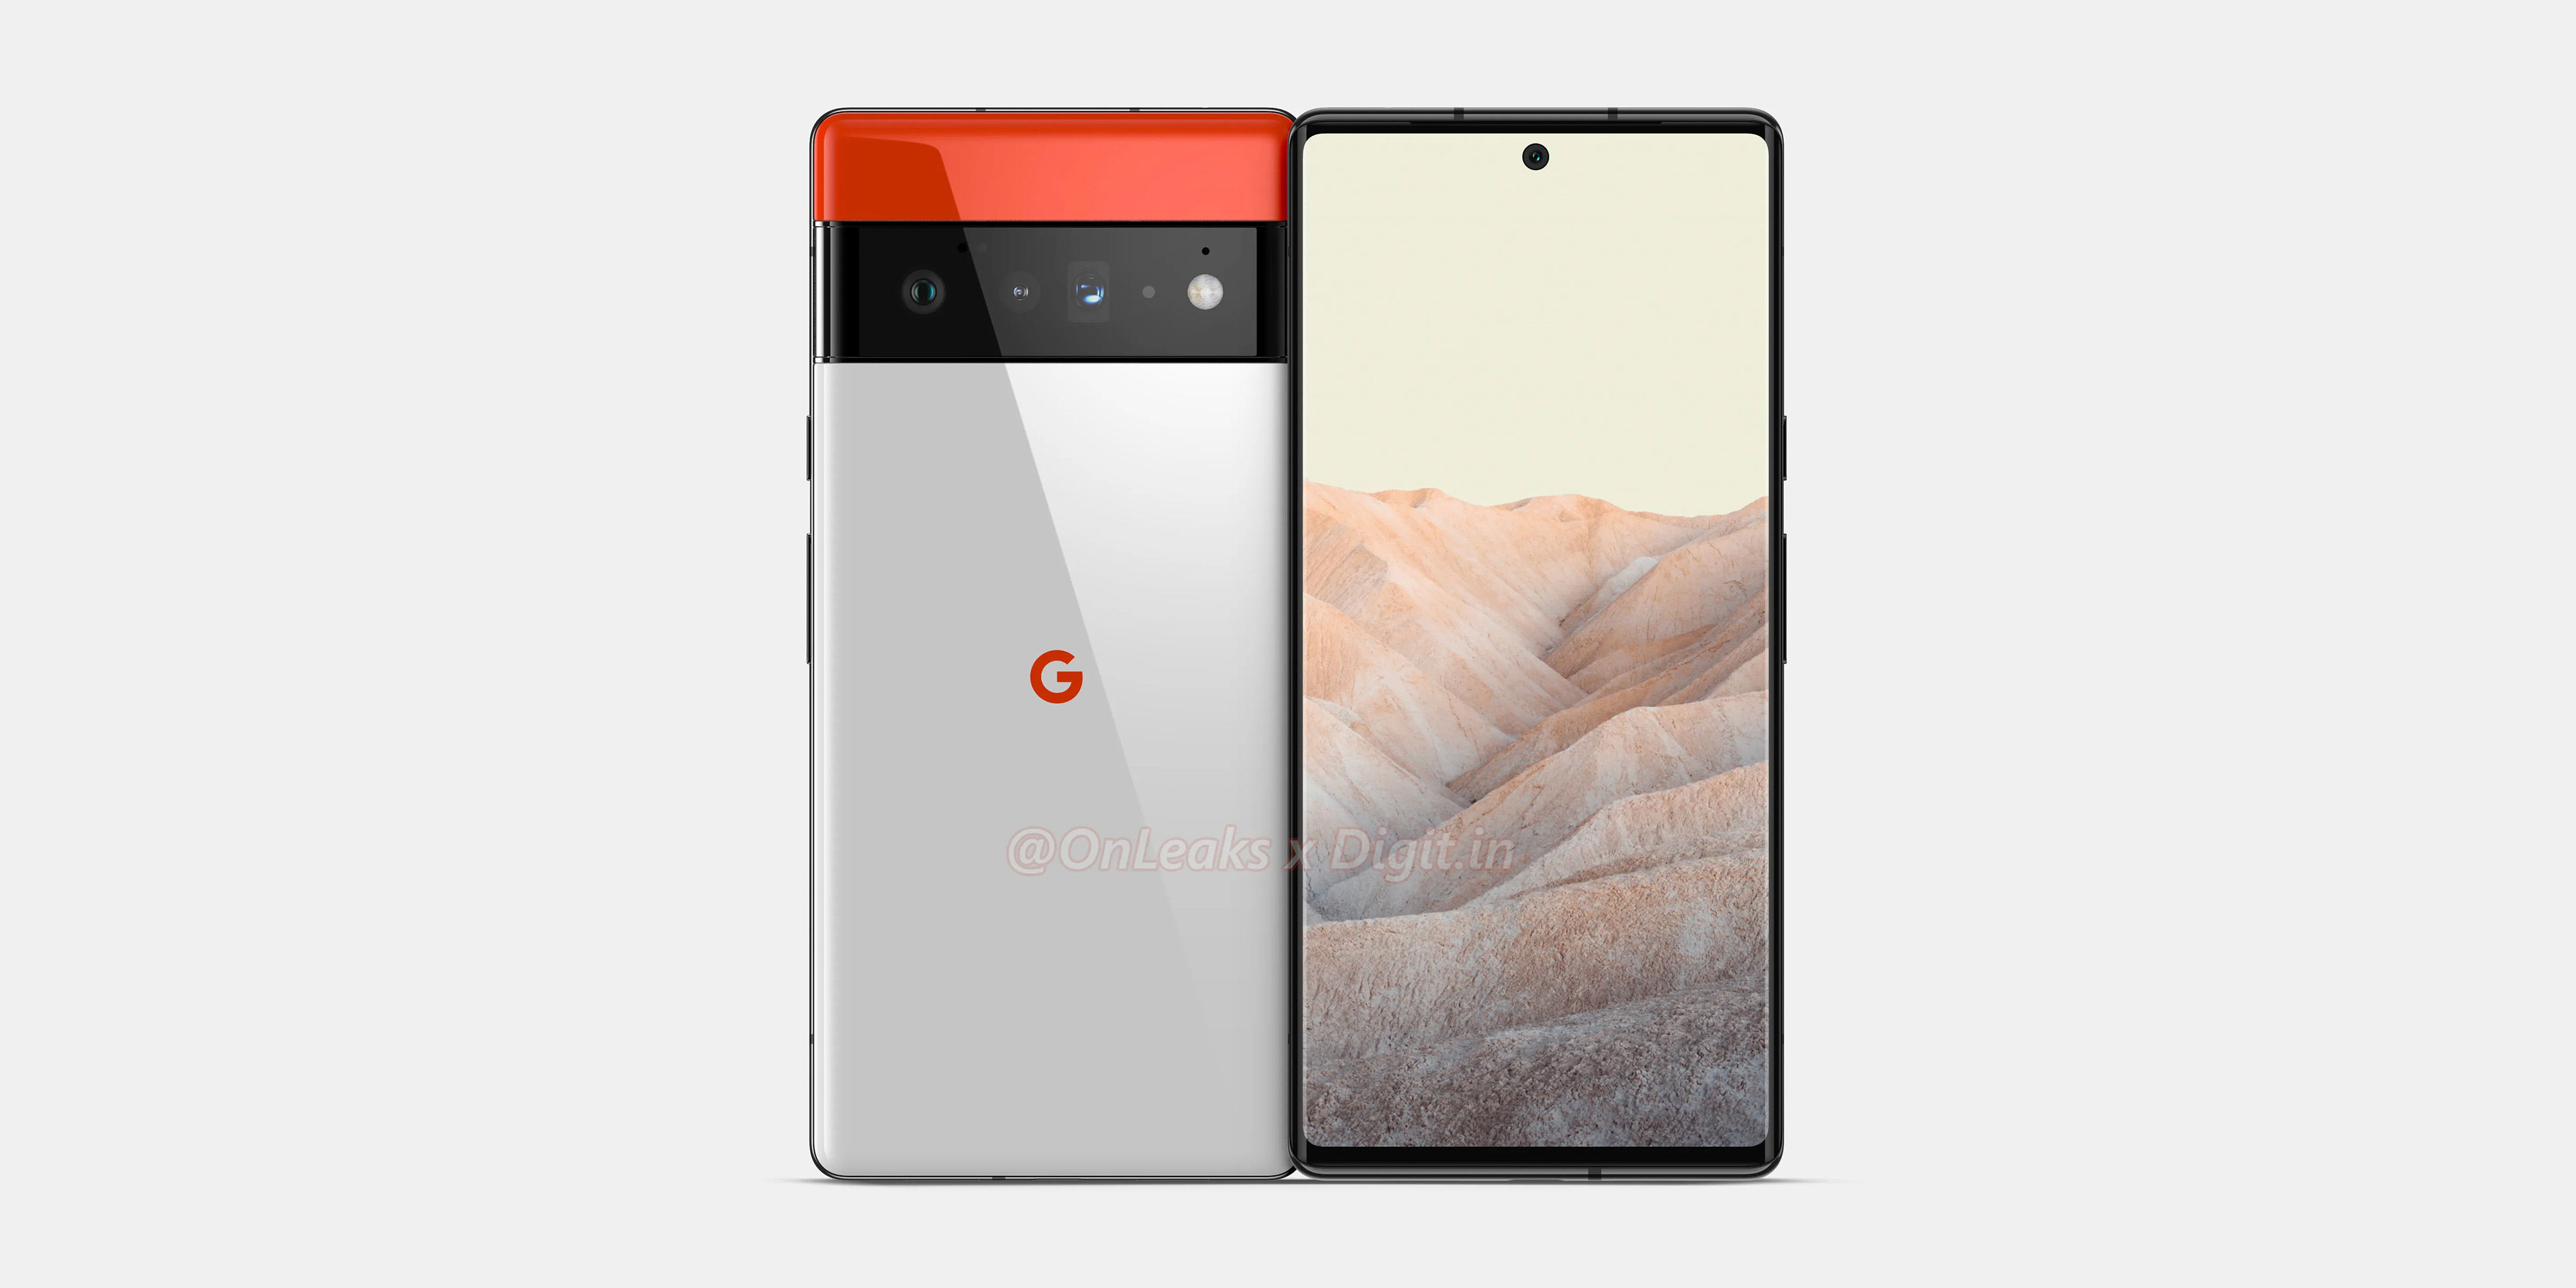 'Pixel 6 Pro' — What we know about Google's XL release 9to5Google